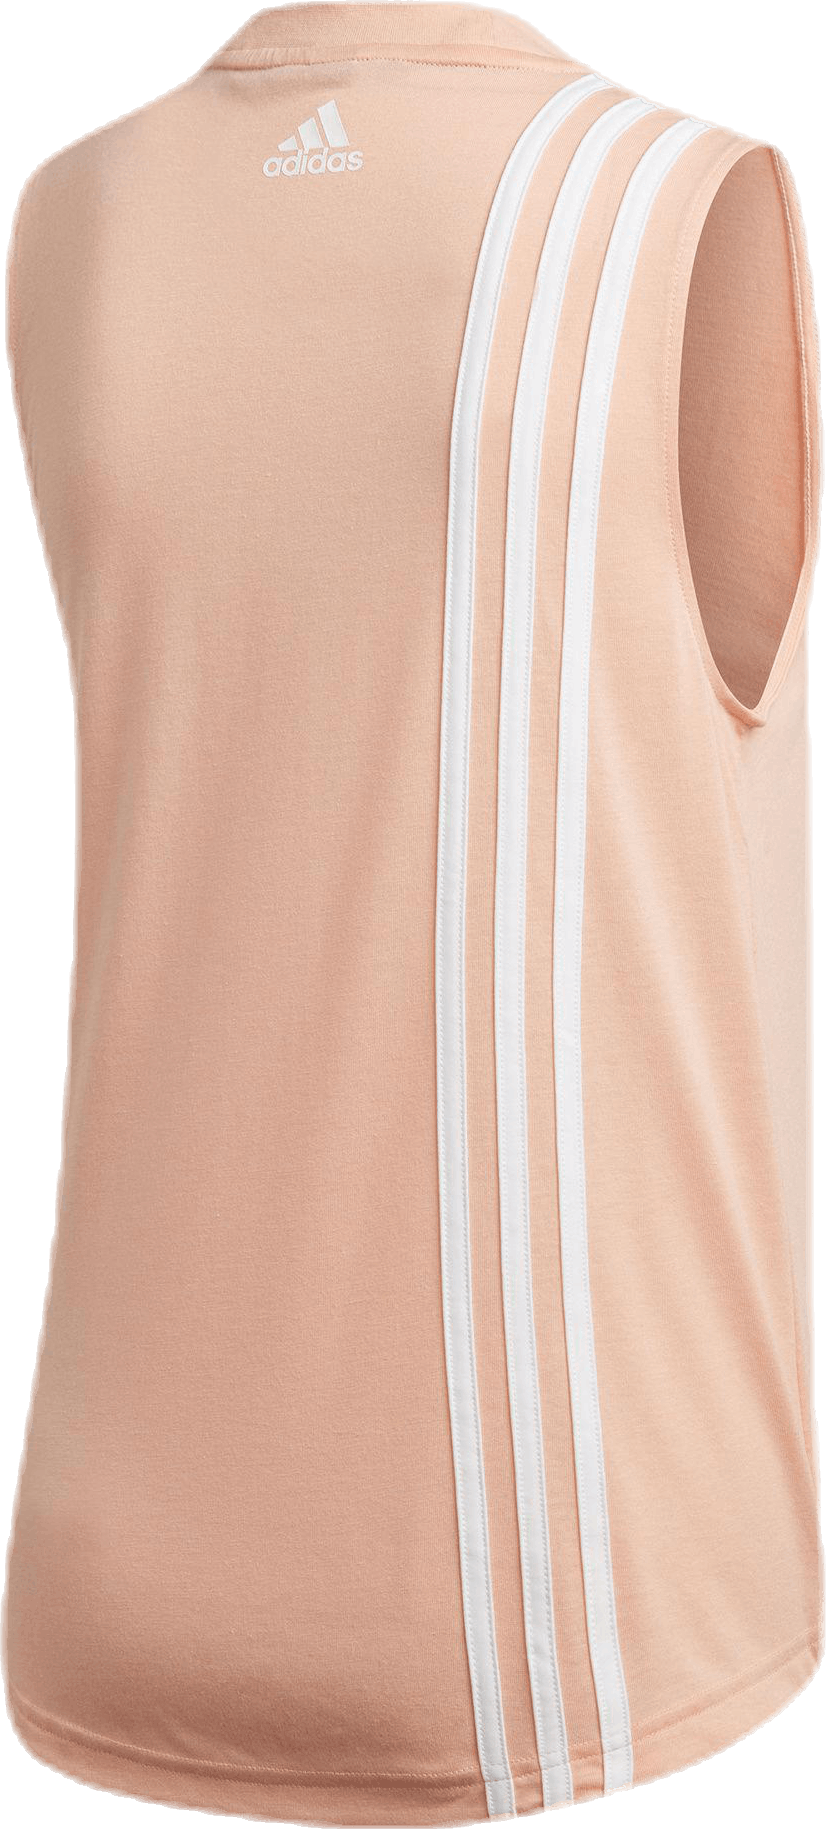 Must Haves 3-Stripes Tank Top Pink